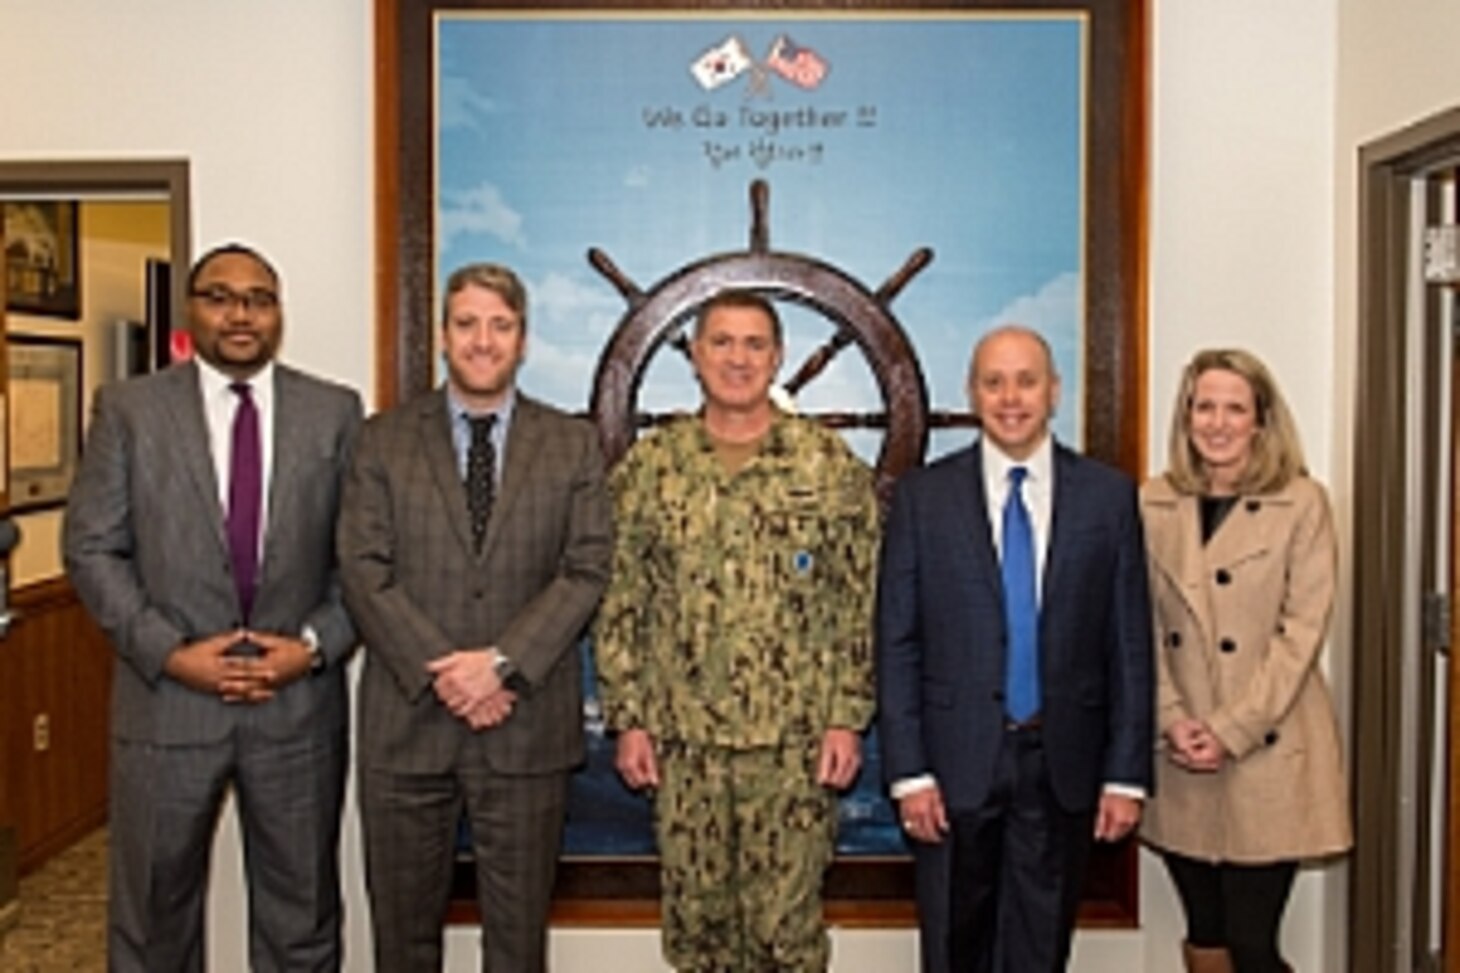 BUSAN, Republic of Korea (March 6, 2019) Rear Adm. Michael E. Boyle, commander, U.S. Naval Forces Korea (CNFK), meets with members of the Congressional Study Group on Korea (CSGK), from left: Tim Butler, Matthew Ceccato, Jason Ross and Alice Johnson. This was CSGK's first visit to CNFK, and it provided an opportunity for Boyle to explain the CNFK role in maintaining and strengthening the Republic of Korea-U.S. alliance.